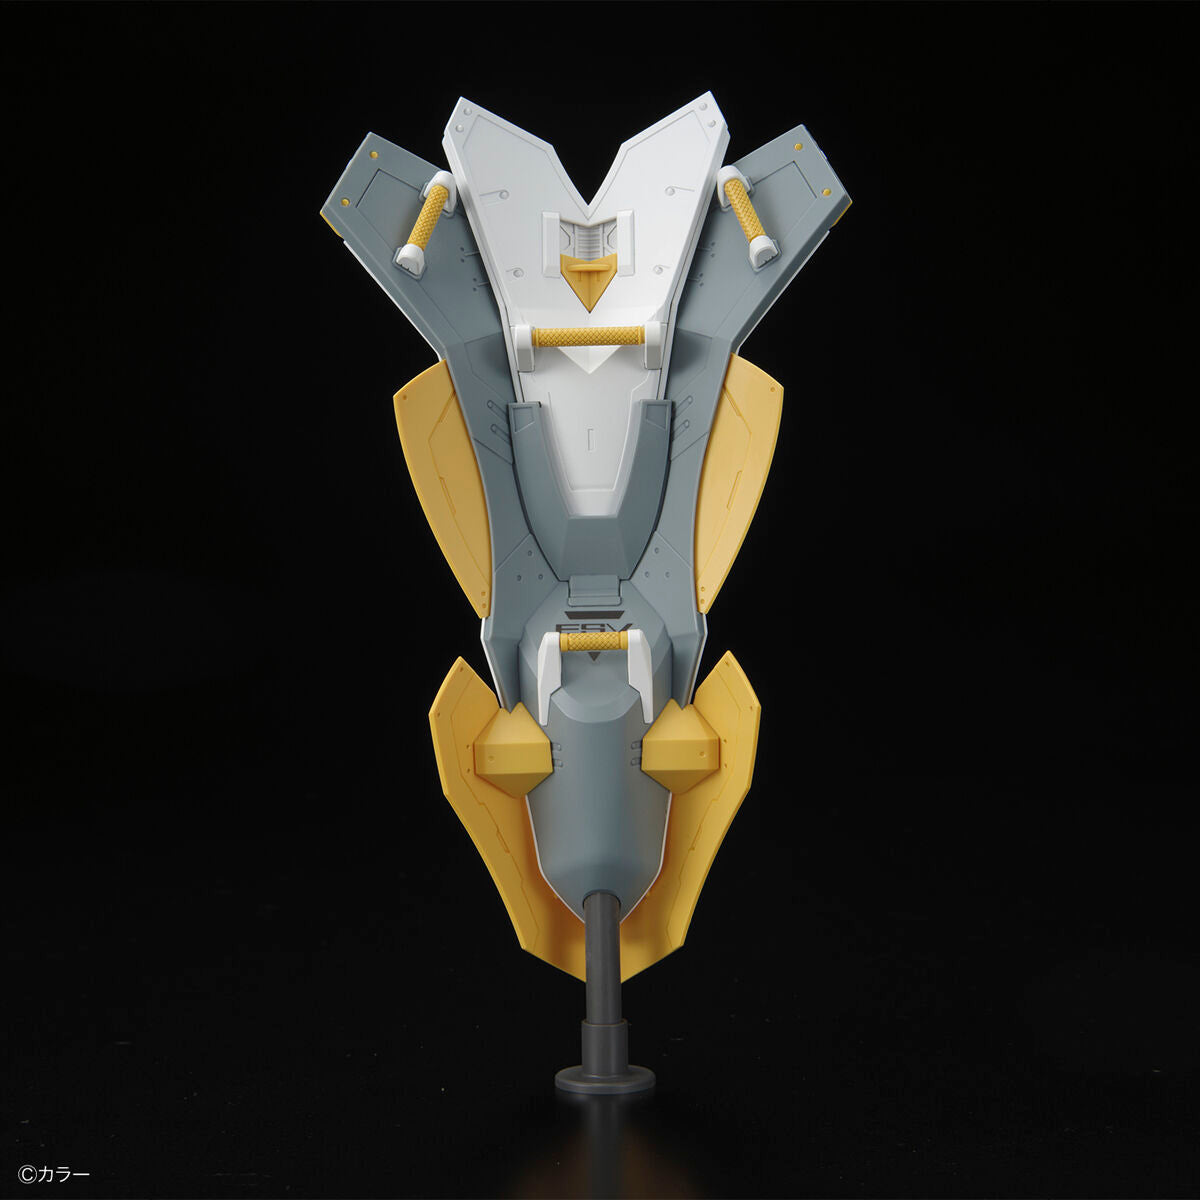 Evangelion - Unit-03 - RG Model Kit - The Enchanted Shield of Virtue Set, From "Evangelion: New Theatrical Edition", includes Evangelion exclusive optical system protective cover, Enchanted Shield of Virtue, and more, sold by Nippon Figures.